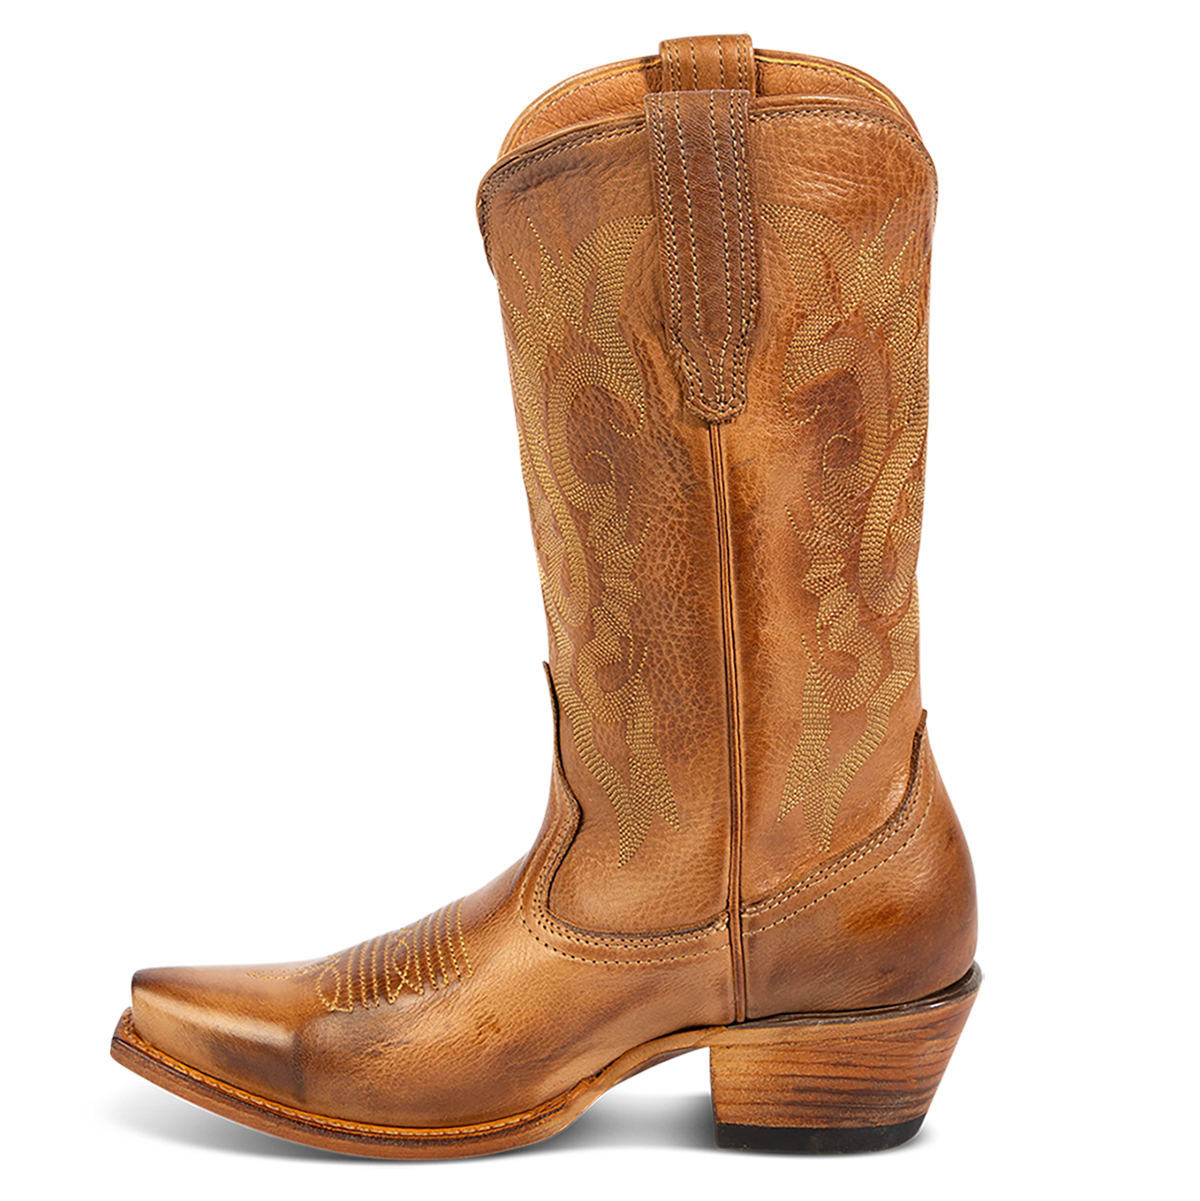 Side view showing FREEBIRD women's Woody wheat leather boot with stitch detailing and snip toe construction